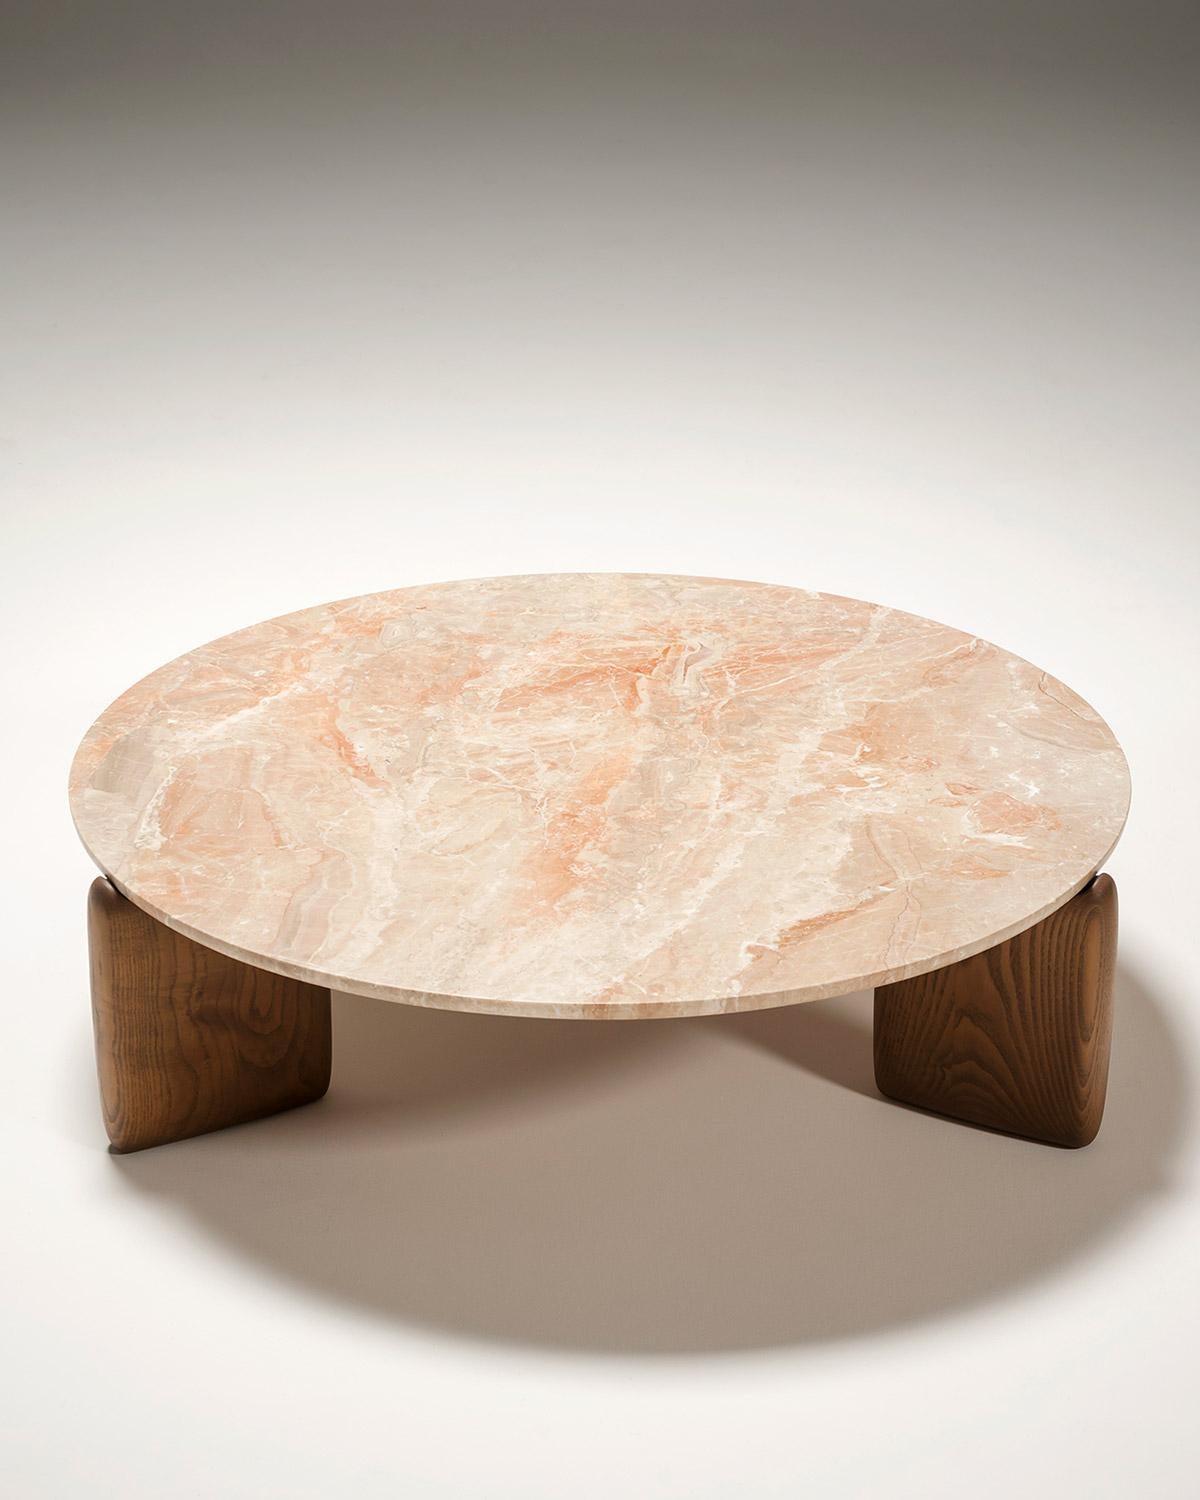 Breccia Marble Tacchini Kanji Large Low Table by Monica Förster